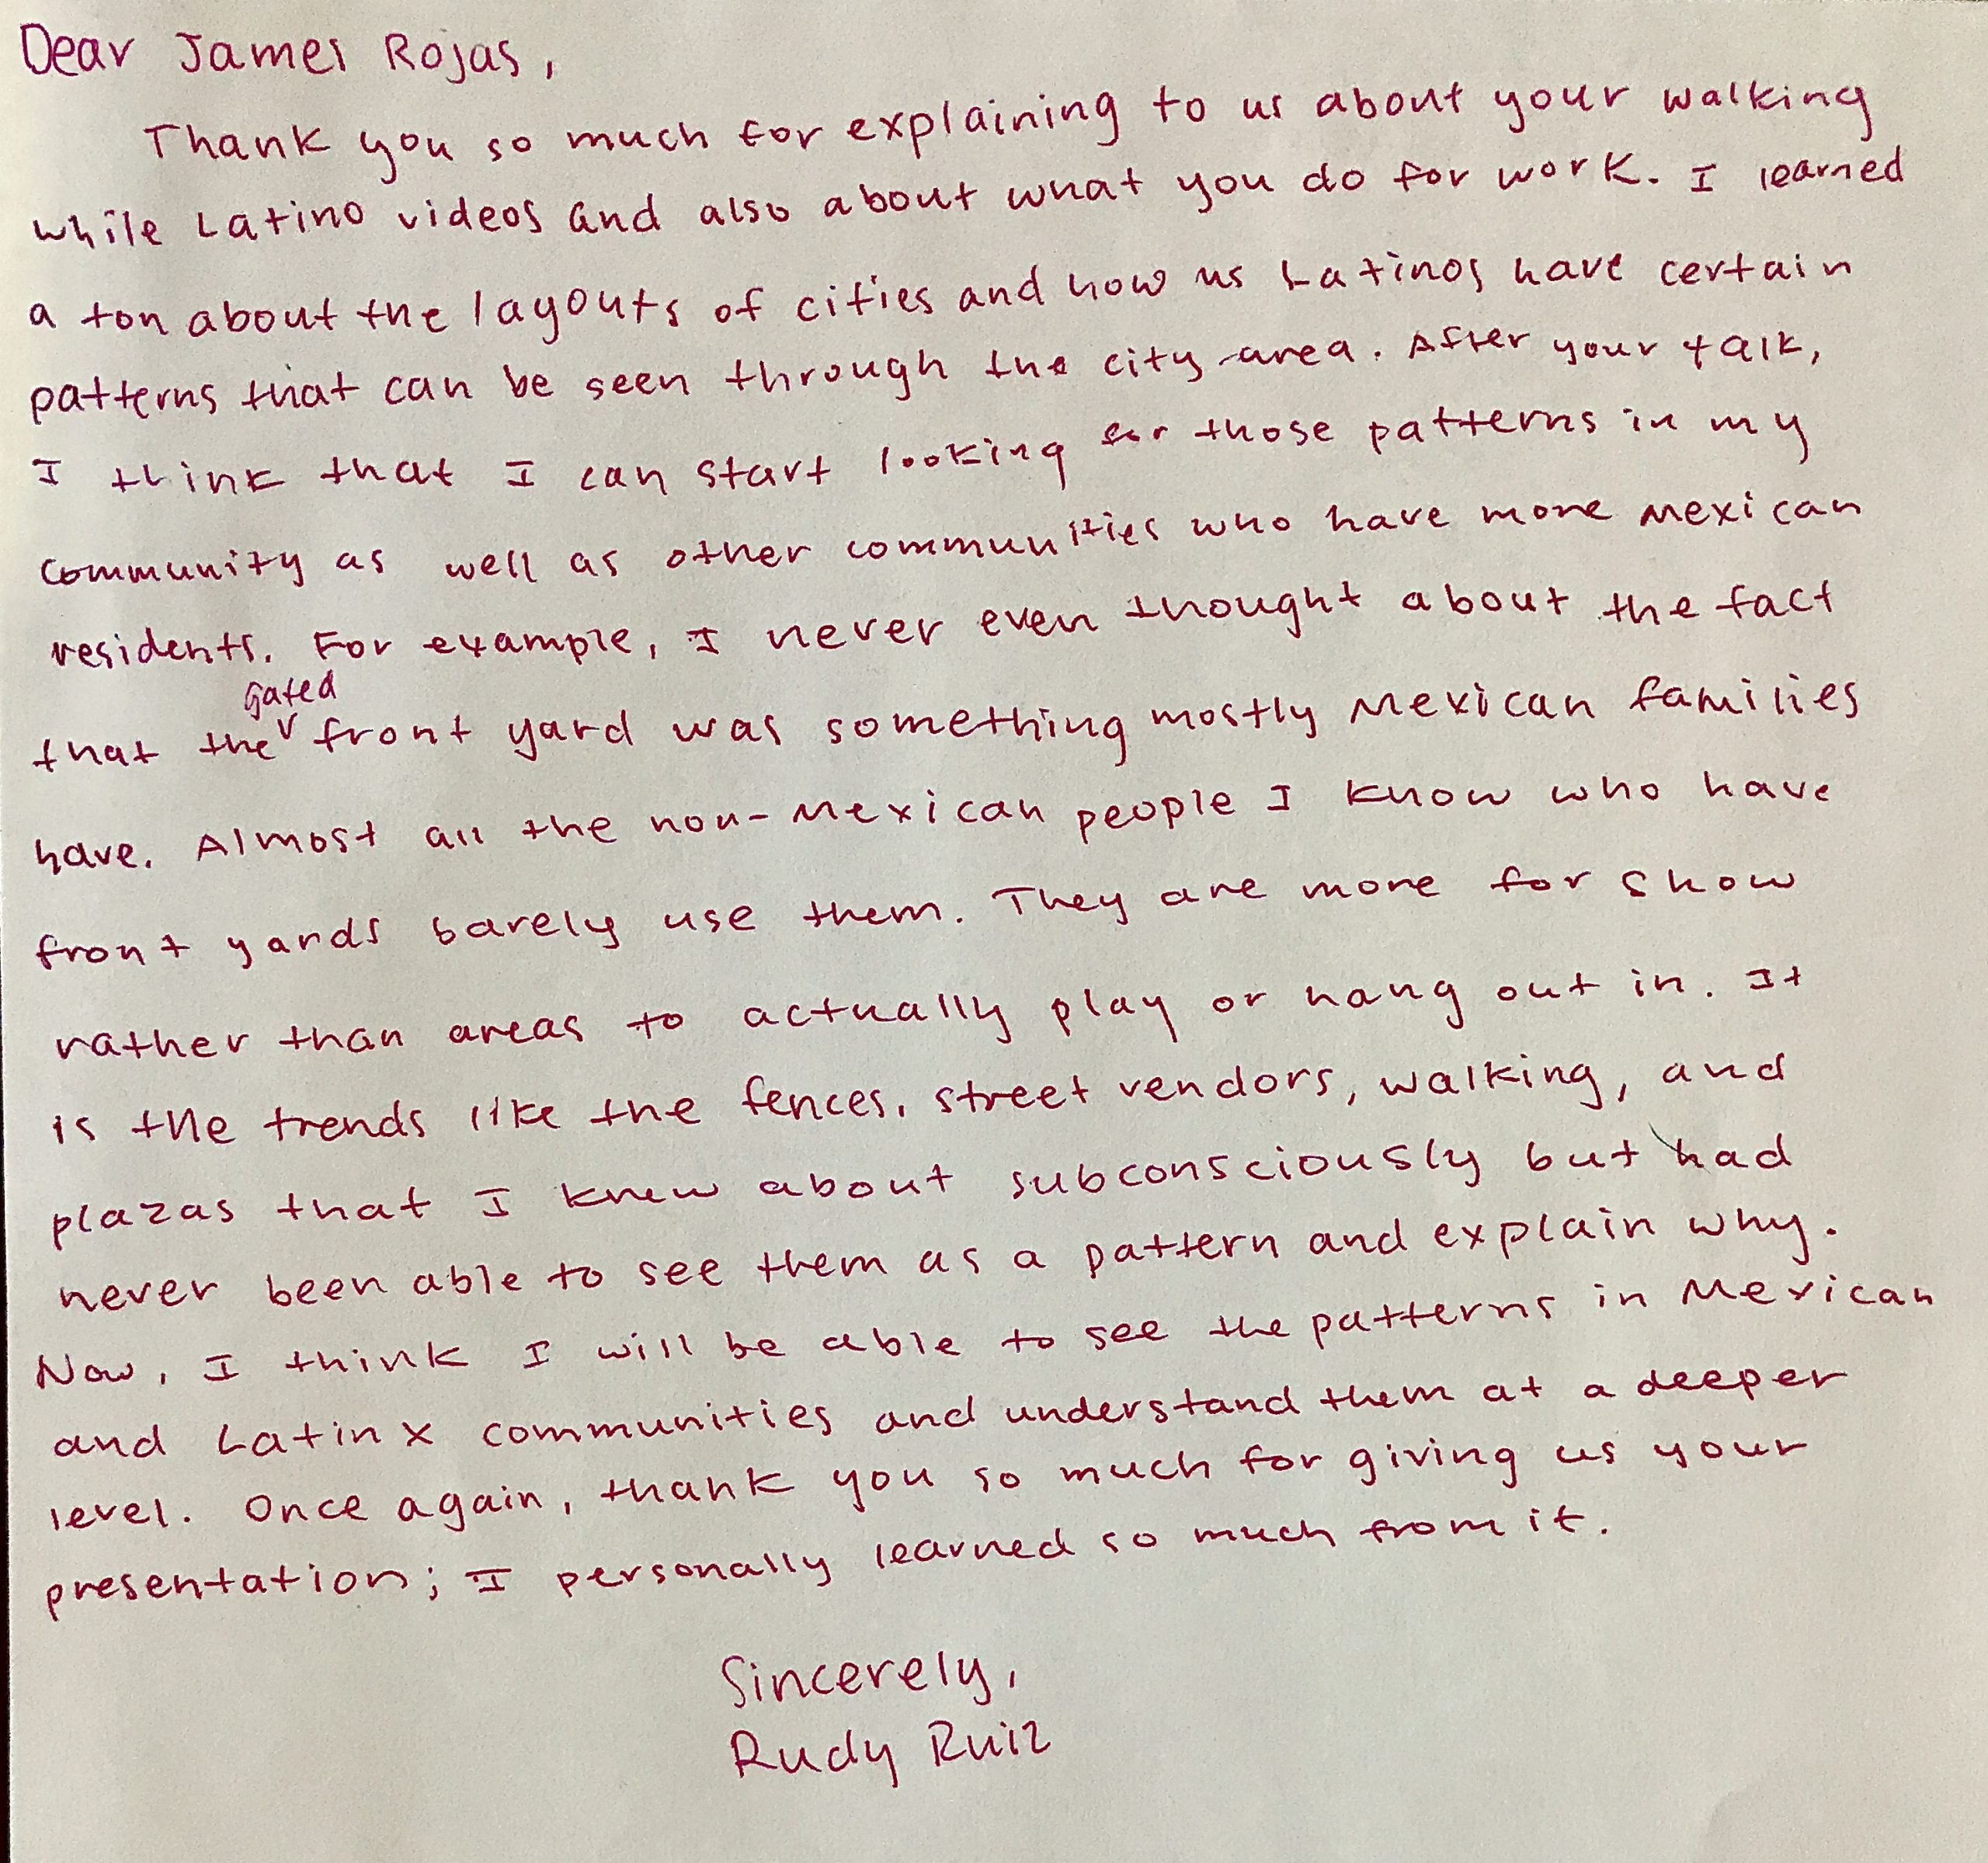 Letter from student who attended James Rojas's virtual presentation on Walking While Latino